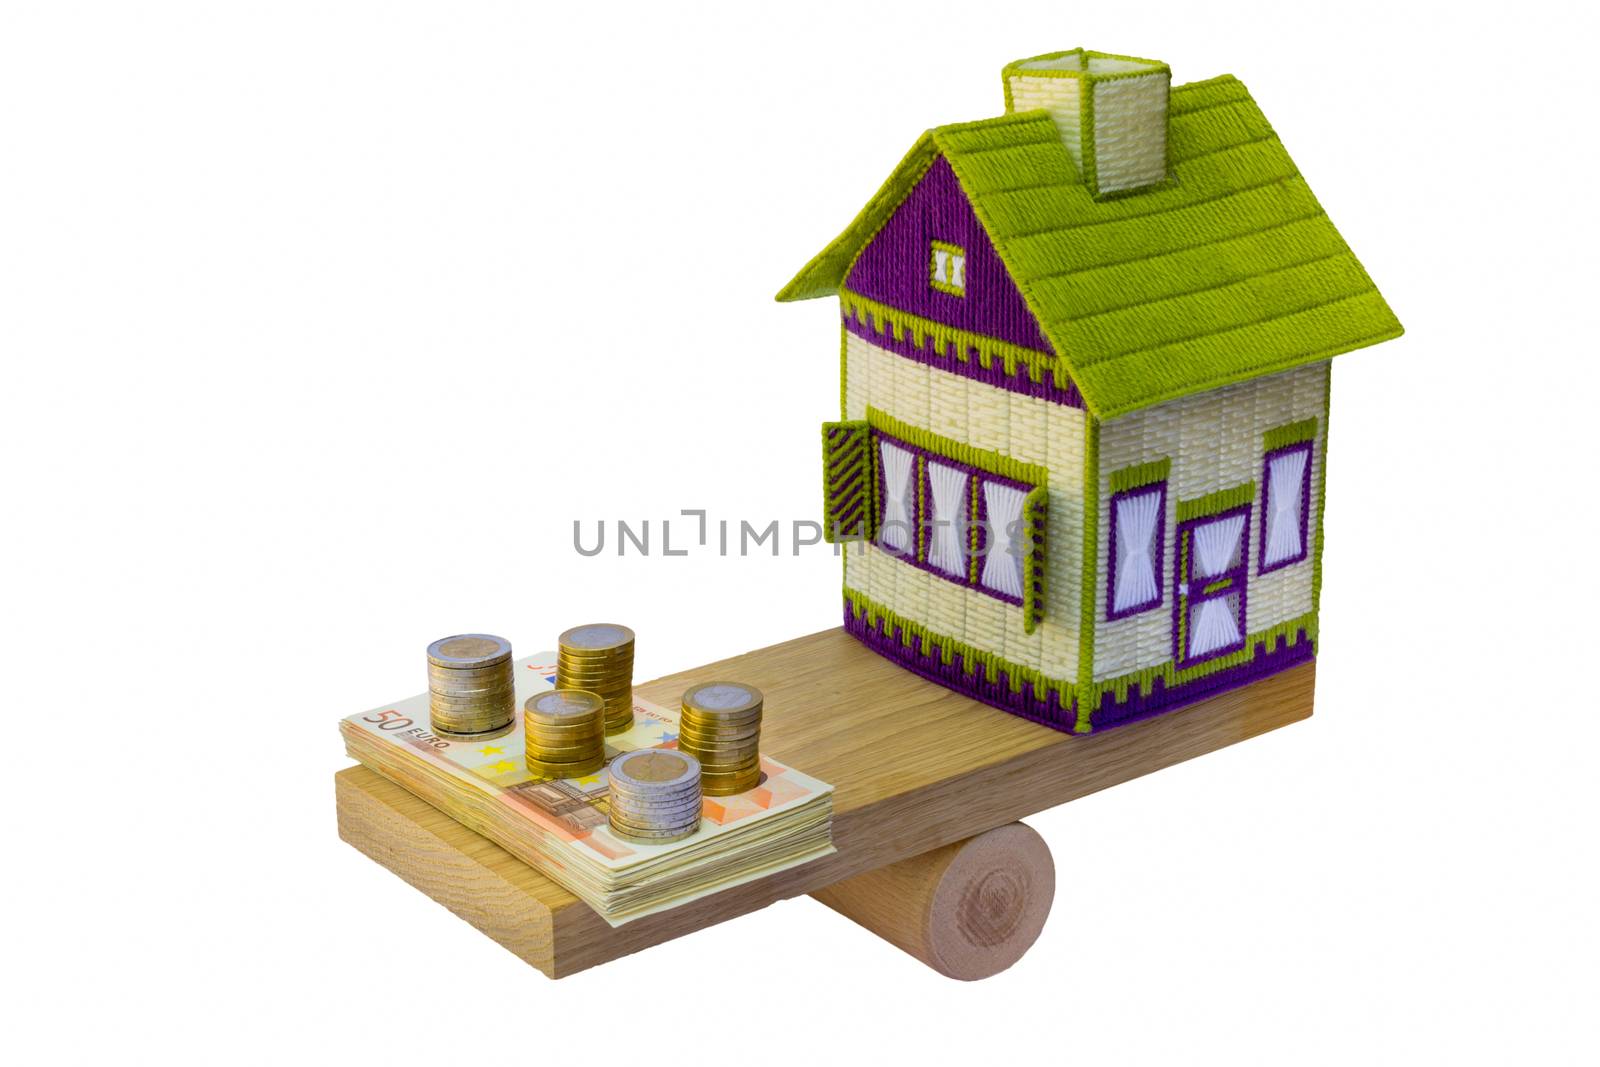 Embroidered house with euro money on seesaw by BenSchonewille